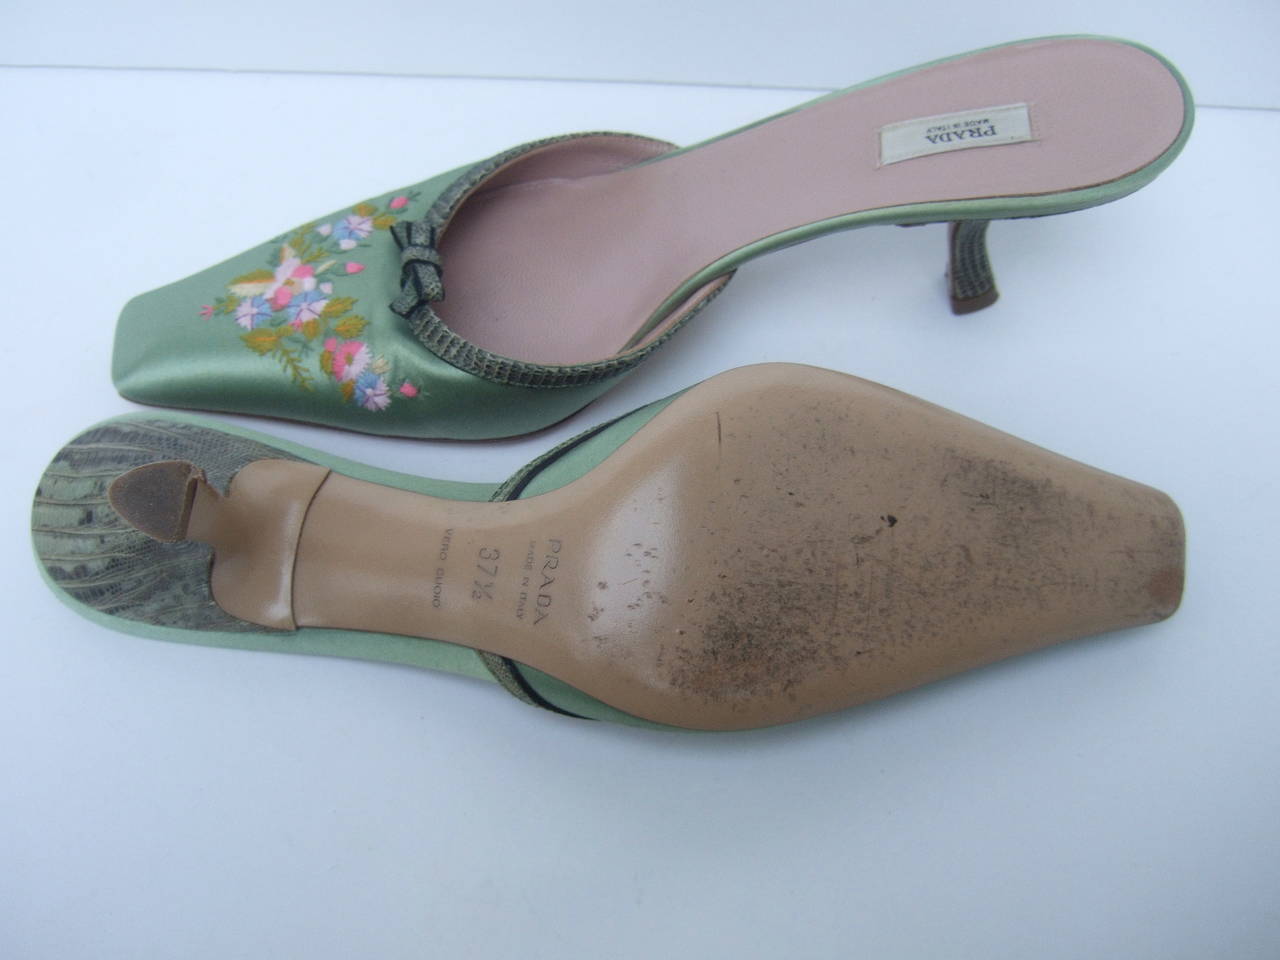 Prada Mint Green Satin Embroidered Mules Size 37.5 Made in Italy 2